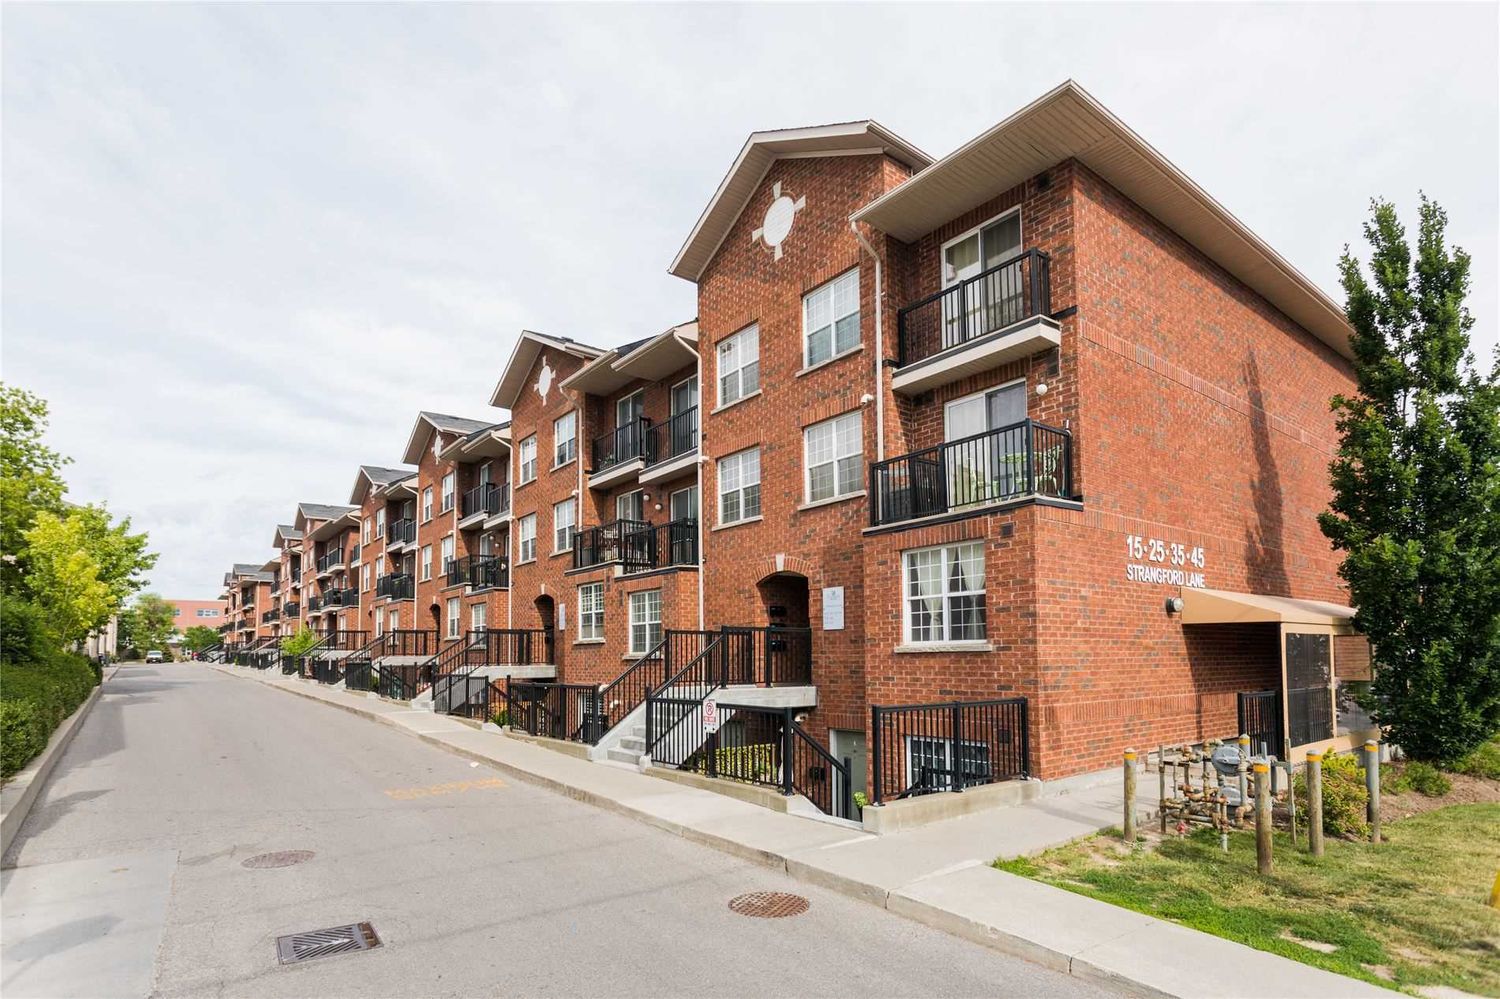 15-45 Strangford Lane. Clairlea Gardens Townhomes is located in  Scarborough, Toronto - image #1 of 2